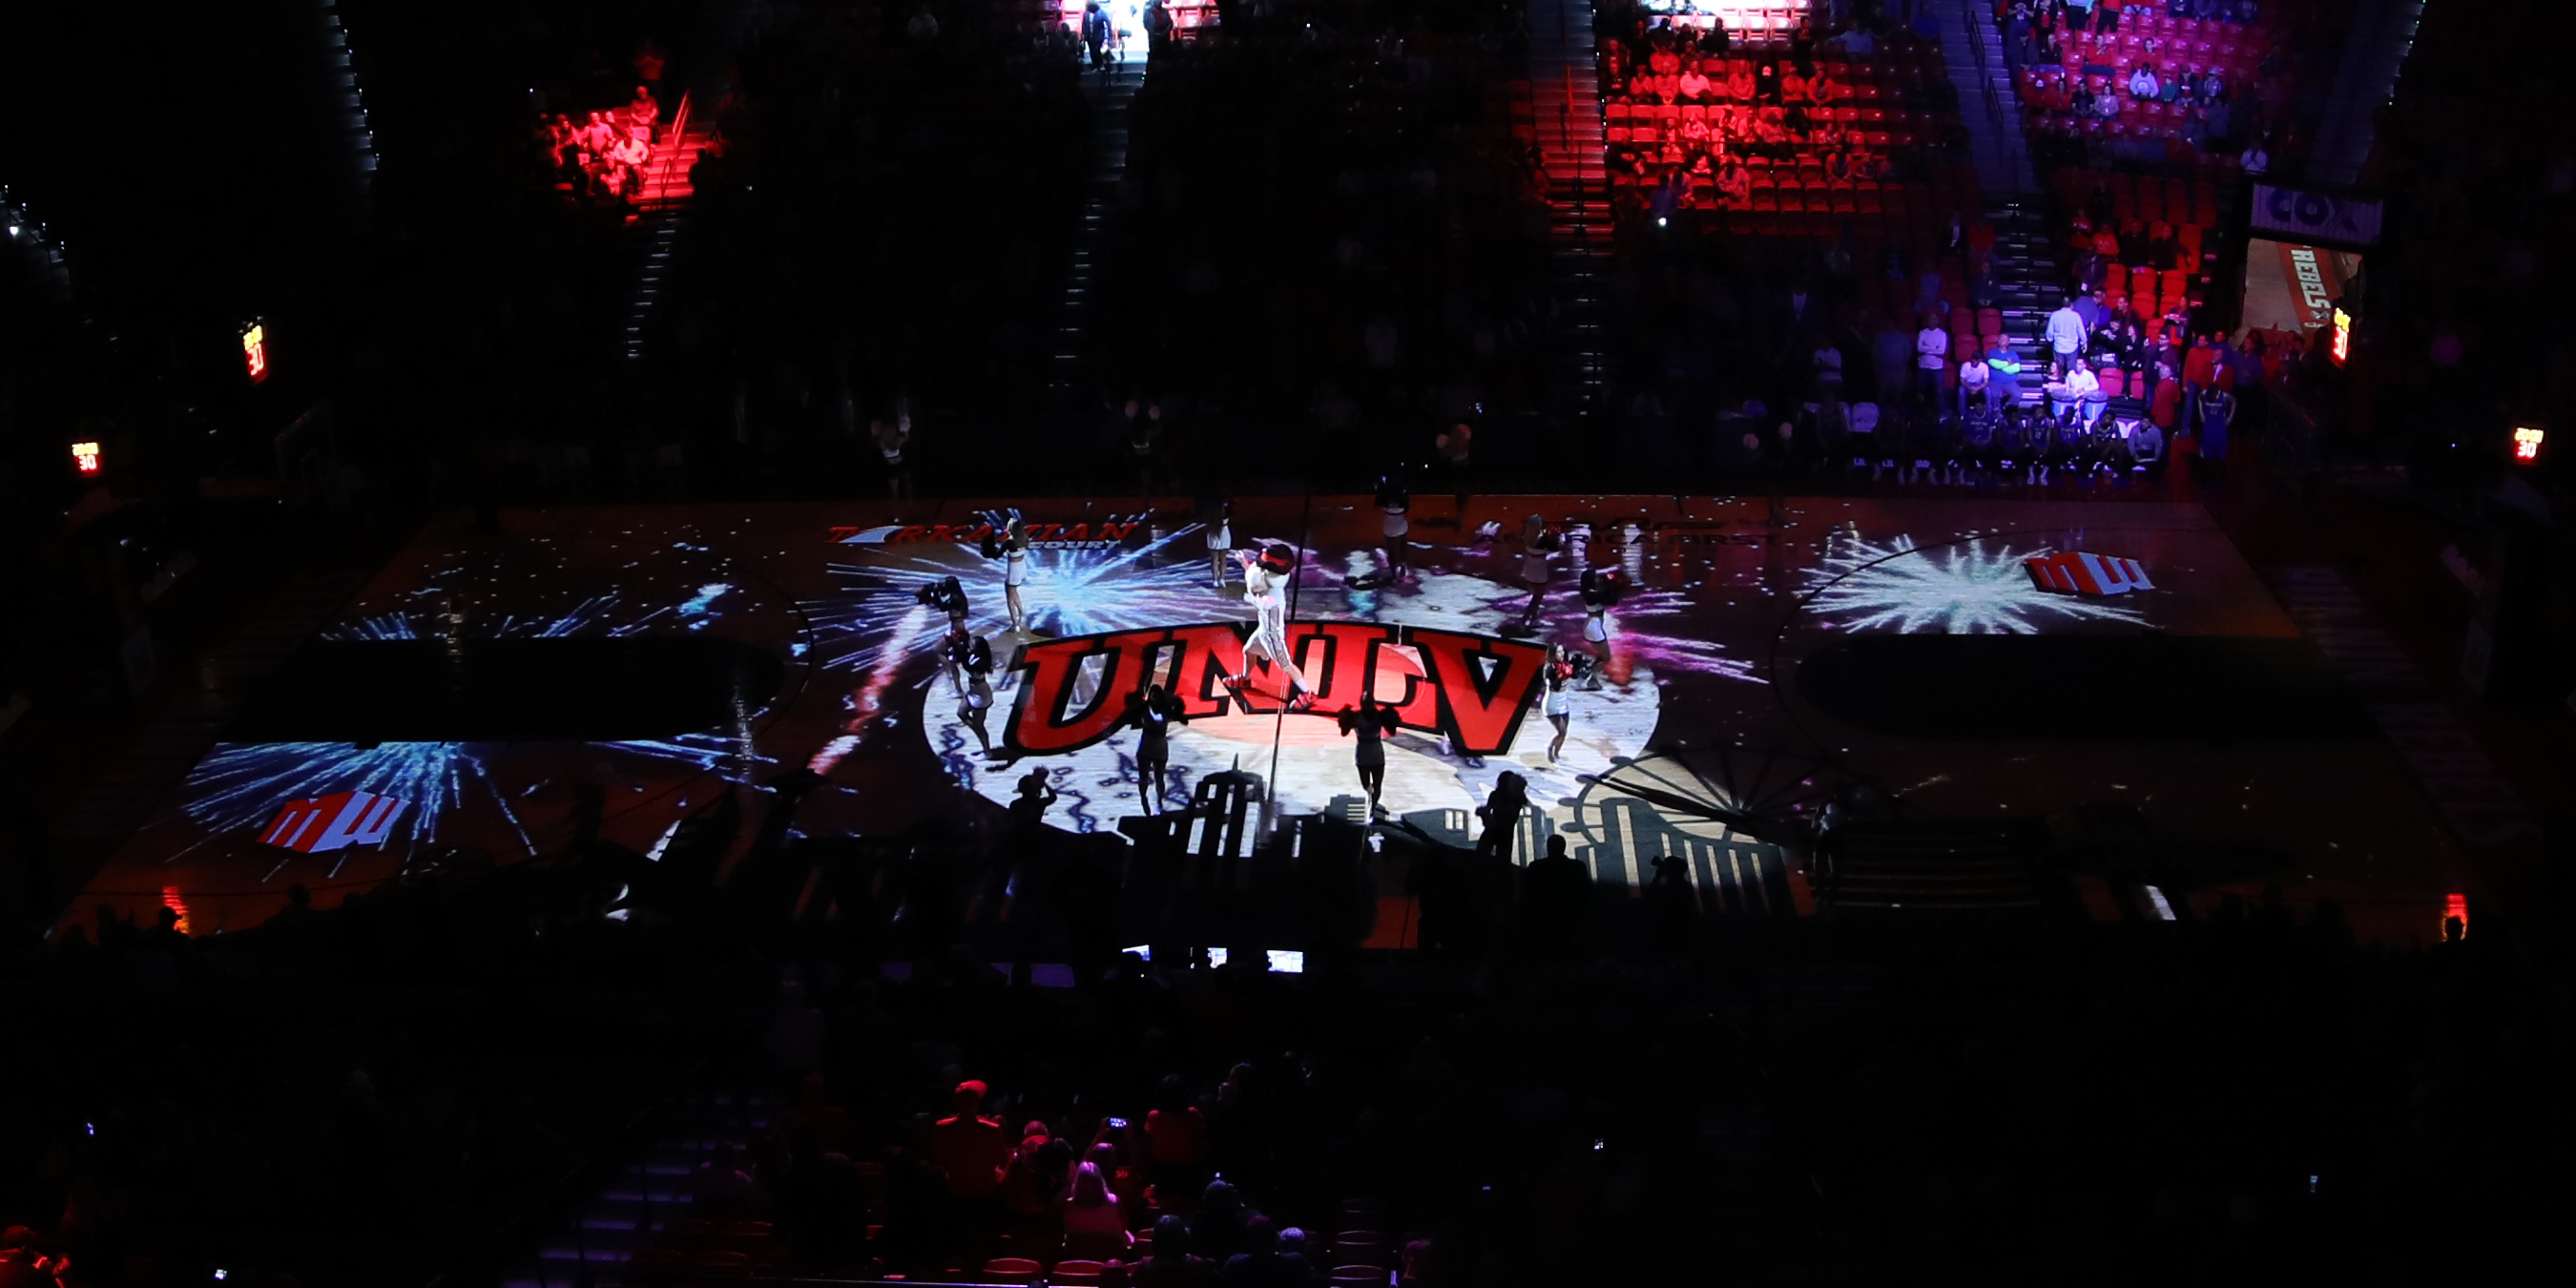 UNLV Runnin’ Rebels basketball pregame show hits the next level with Epson’s innovative laser projector technology